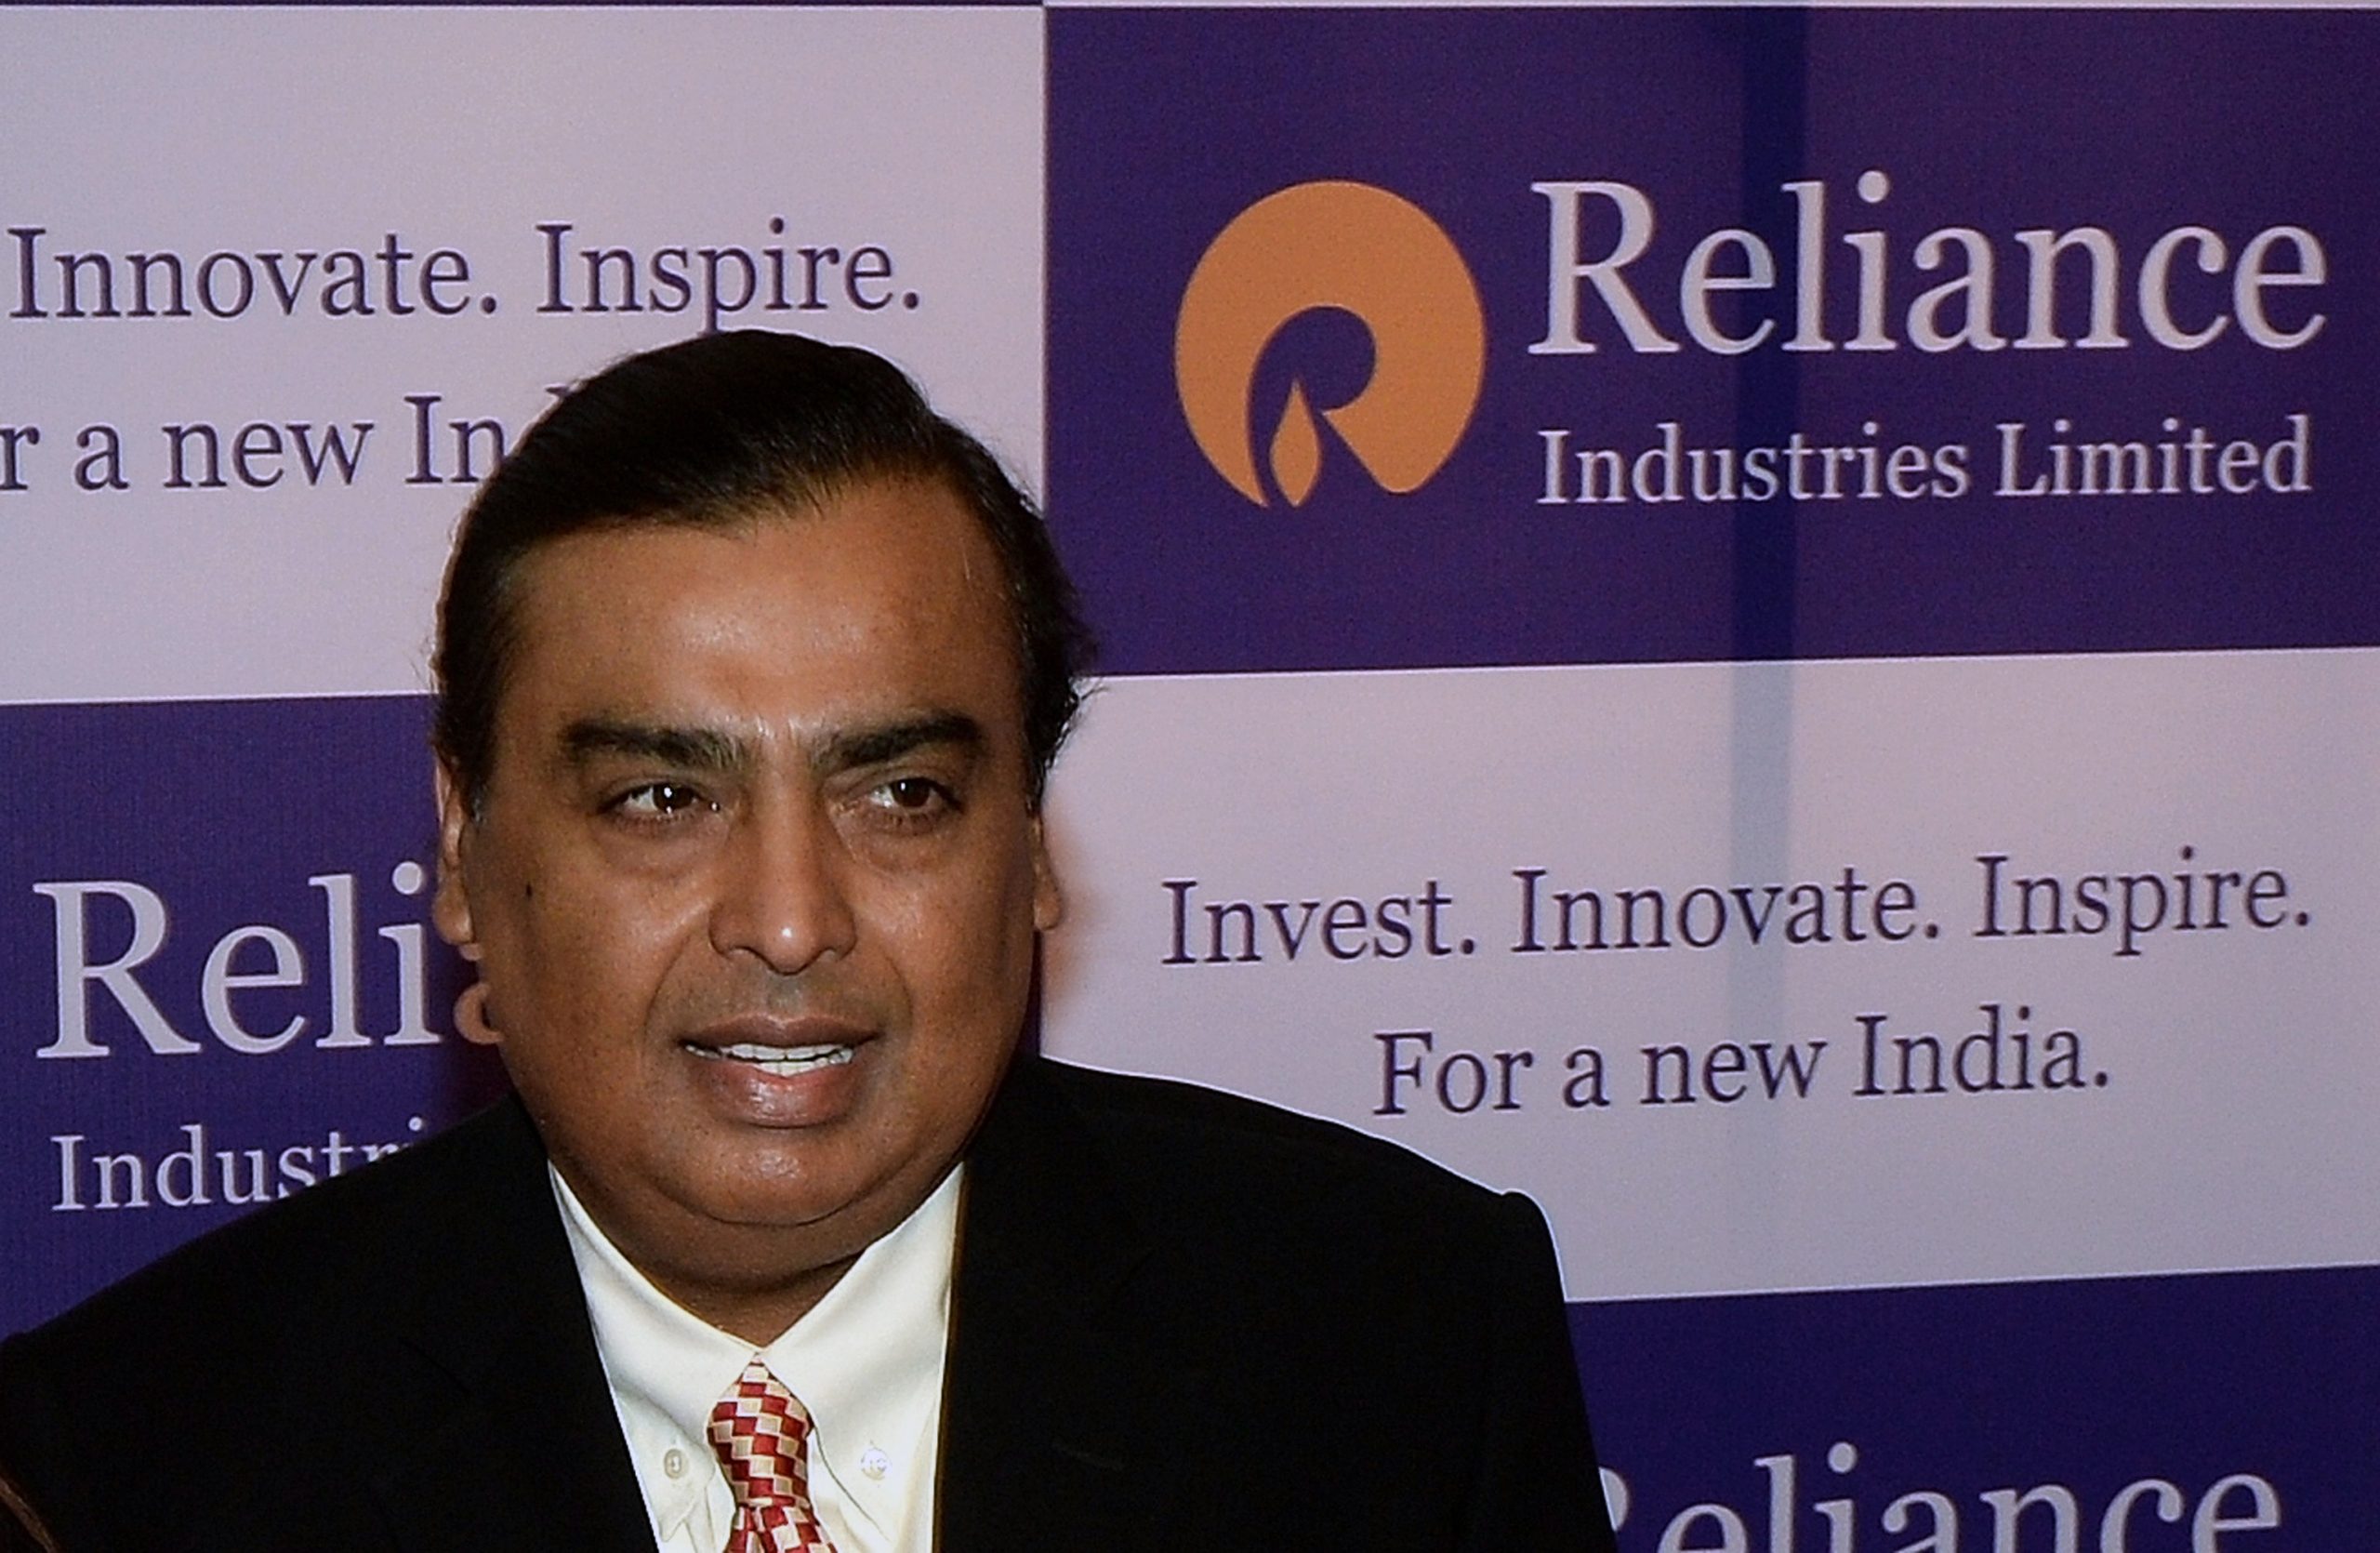 Reliance to partner with Google for 5G rollout in India